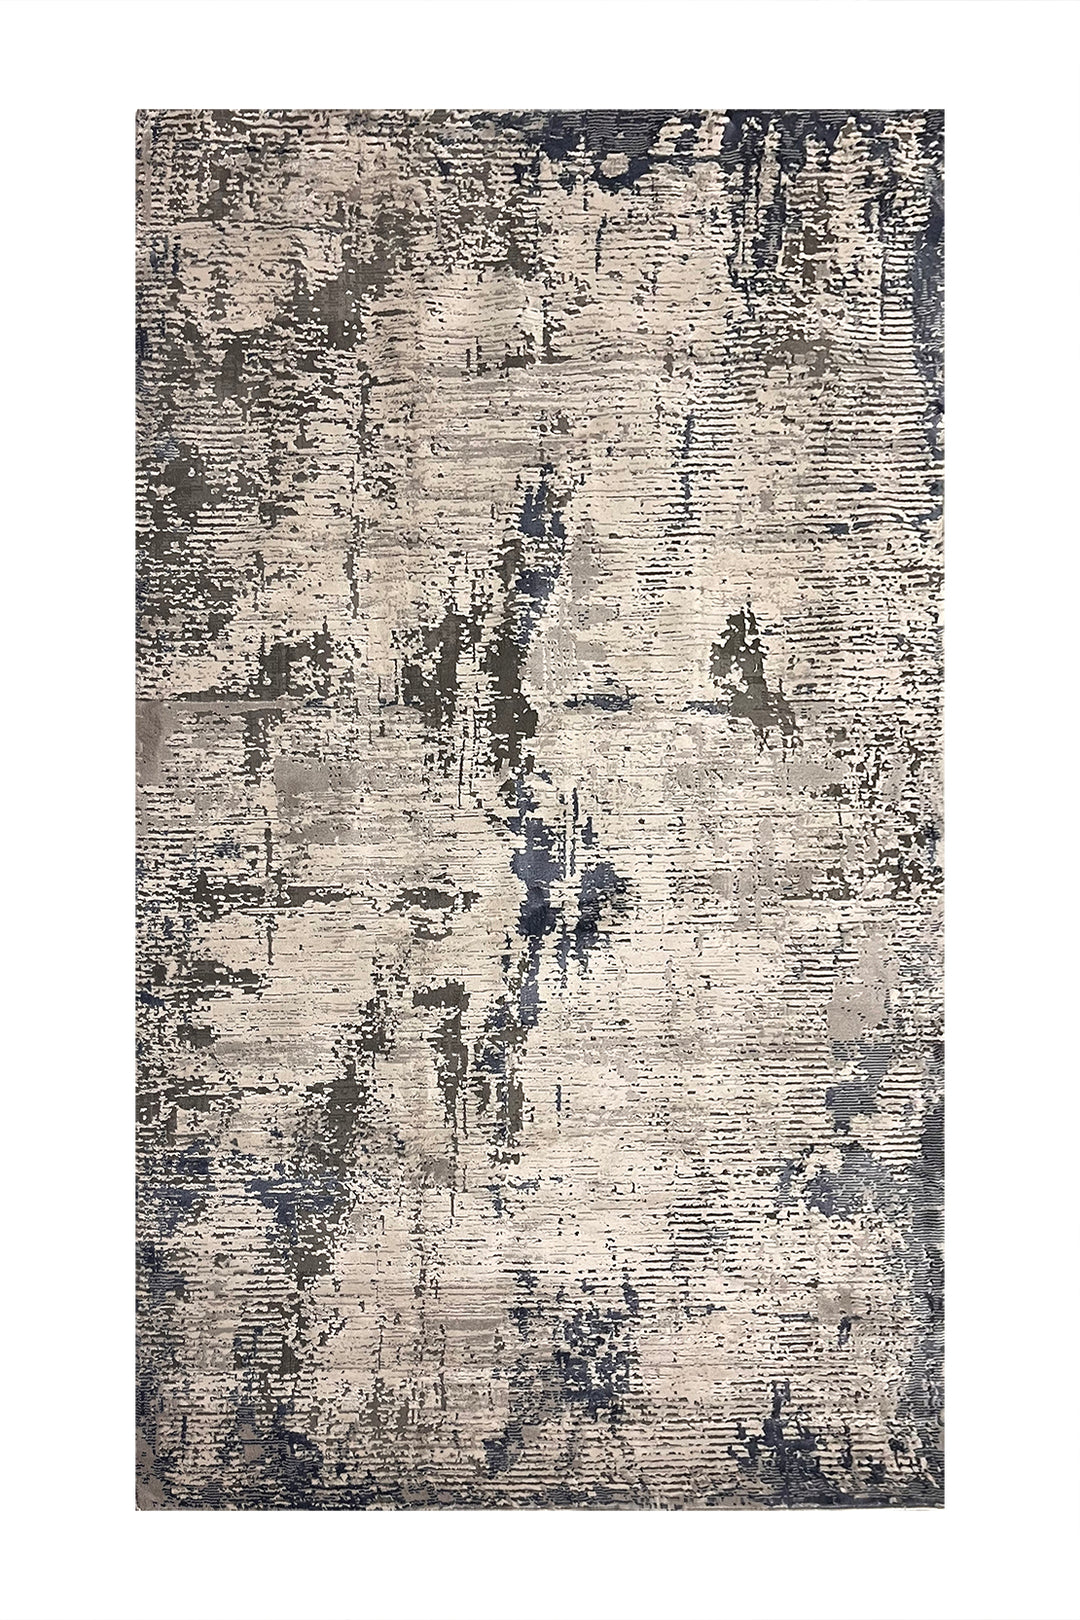 Turkish Modern Festival WD Rug - Gray-  5.2 x 7.5 FT - Sleek and Minimalist for Chic Interiors